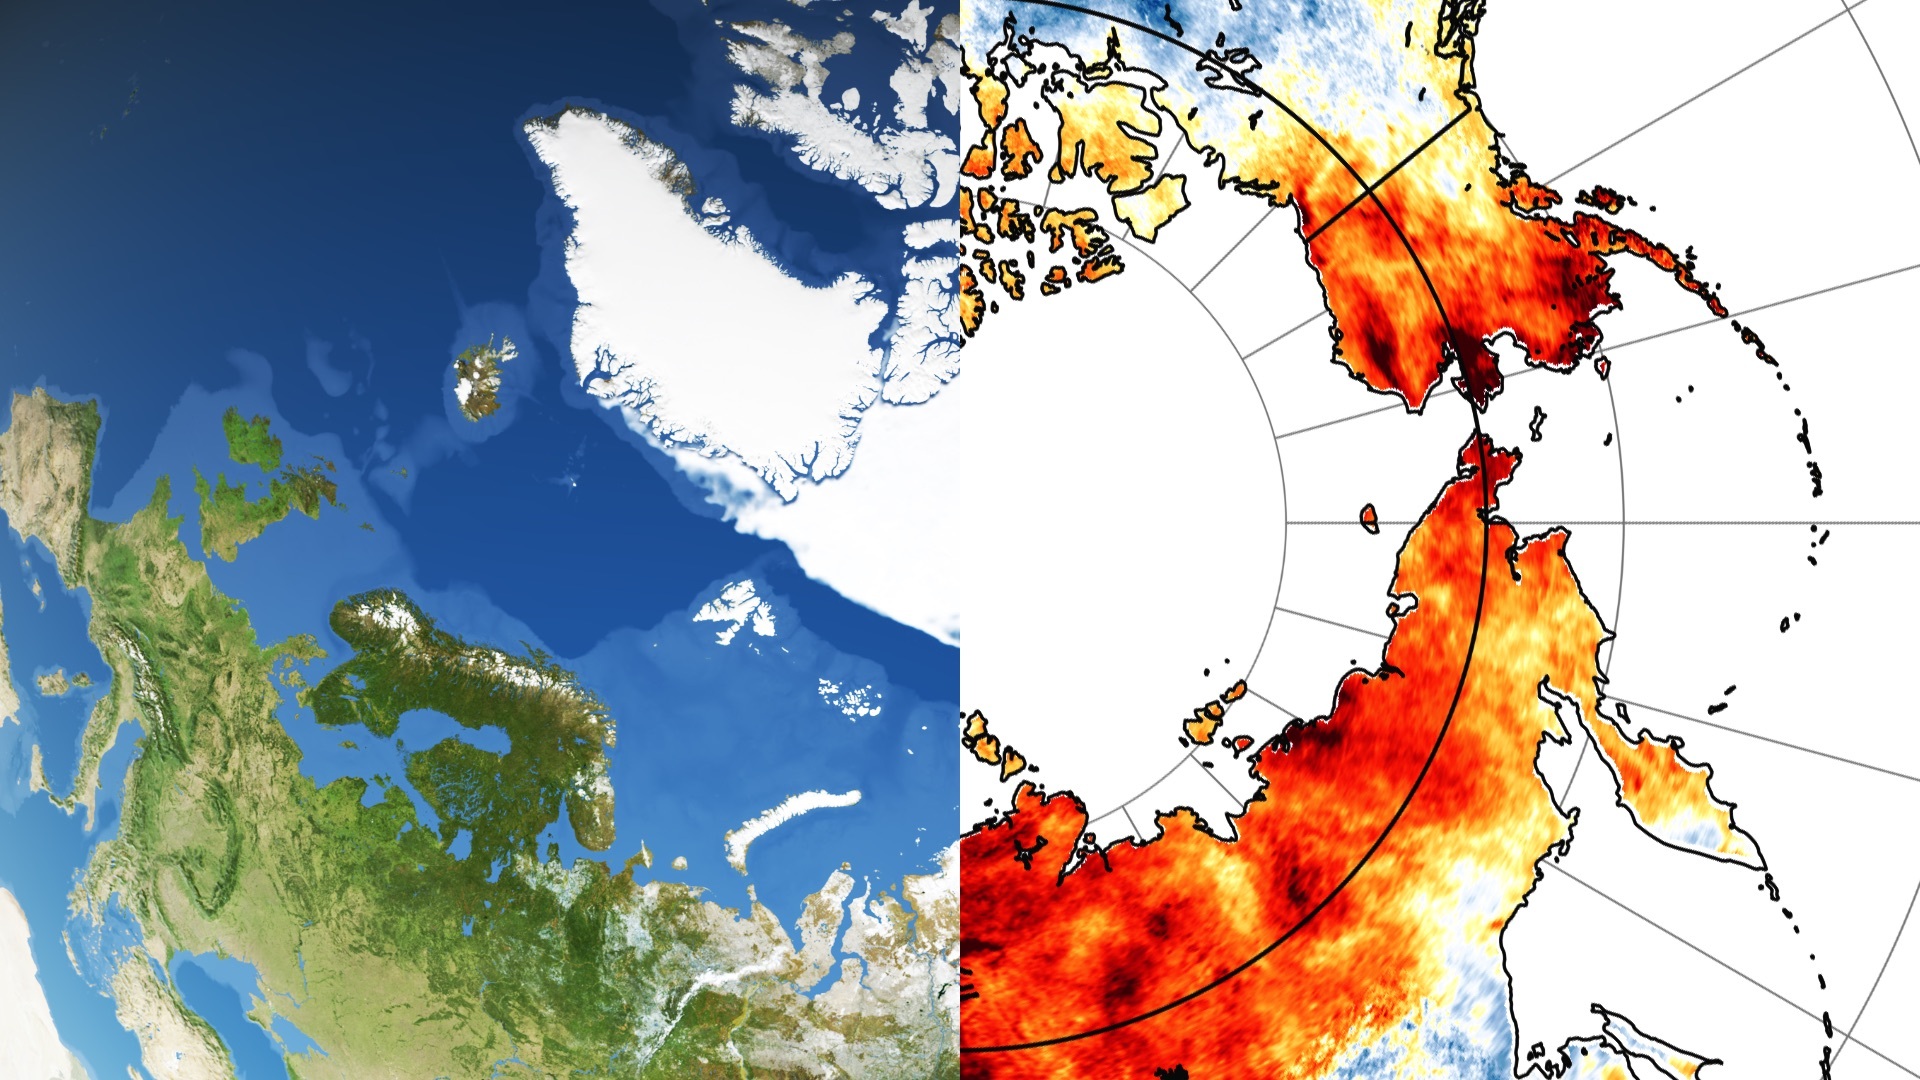 Preview Image for NASA Sees High Temperatures, Wildfires, and Annual Sea Ice Minimum Extent in Warming Arctic